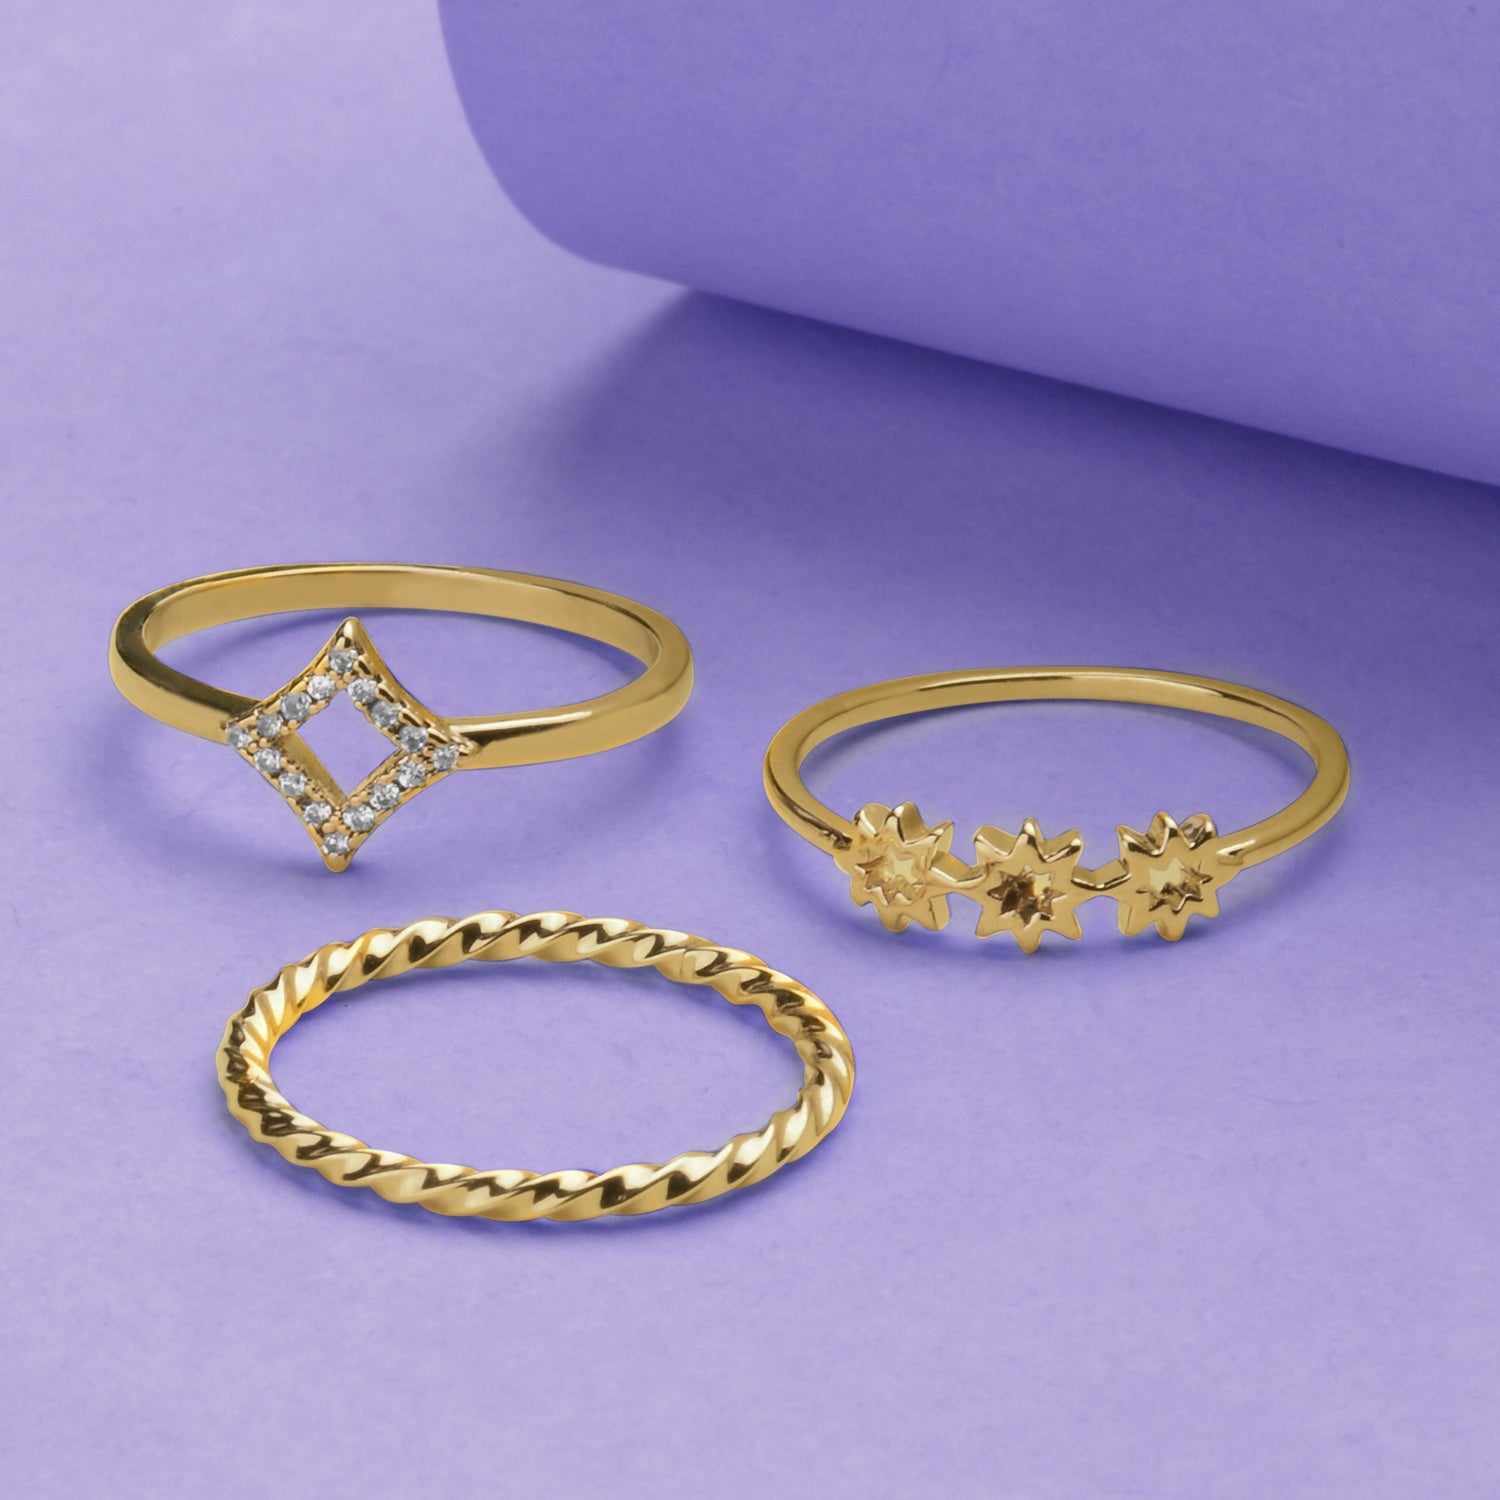 Real Gold Plated Set of 3 Diamond Ring Set For Women By Accessorize London